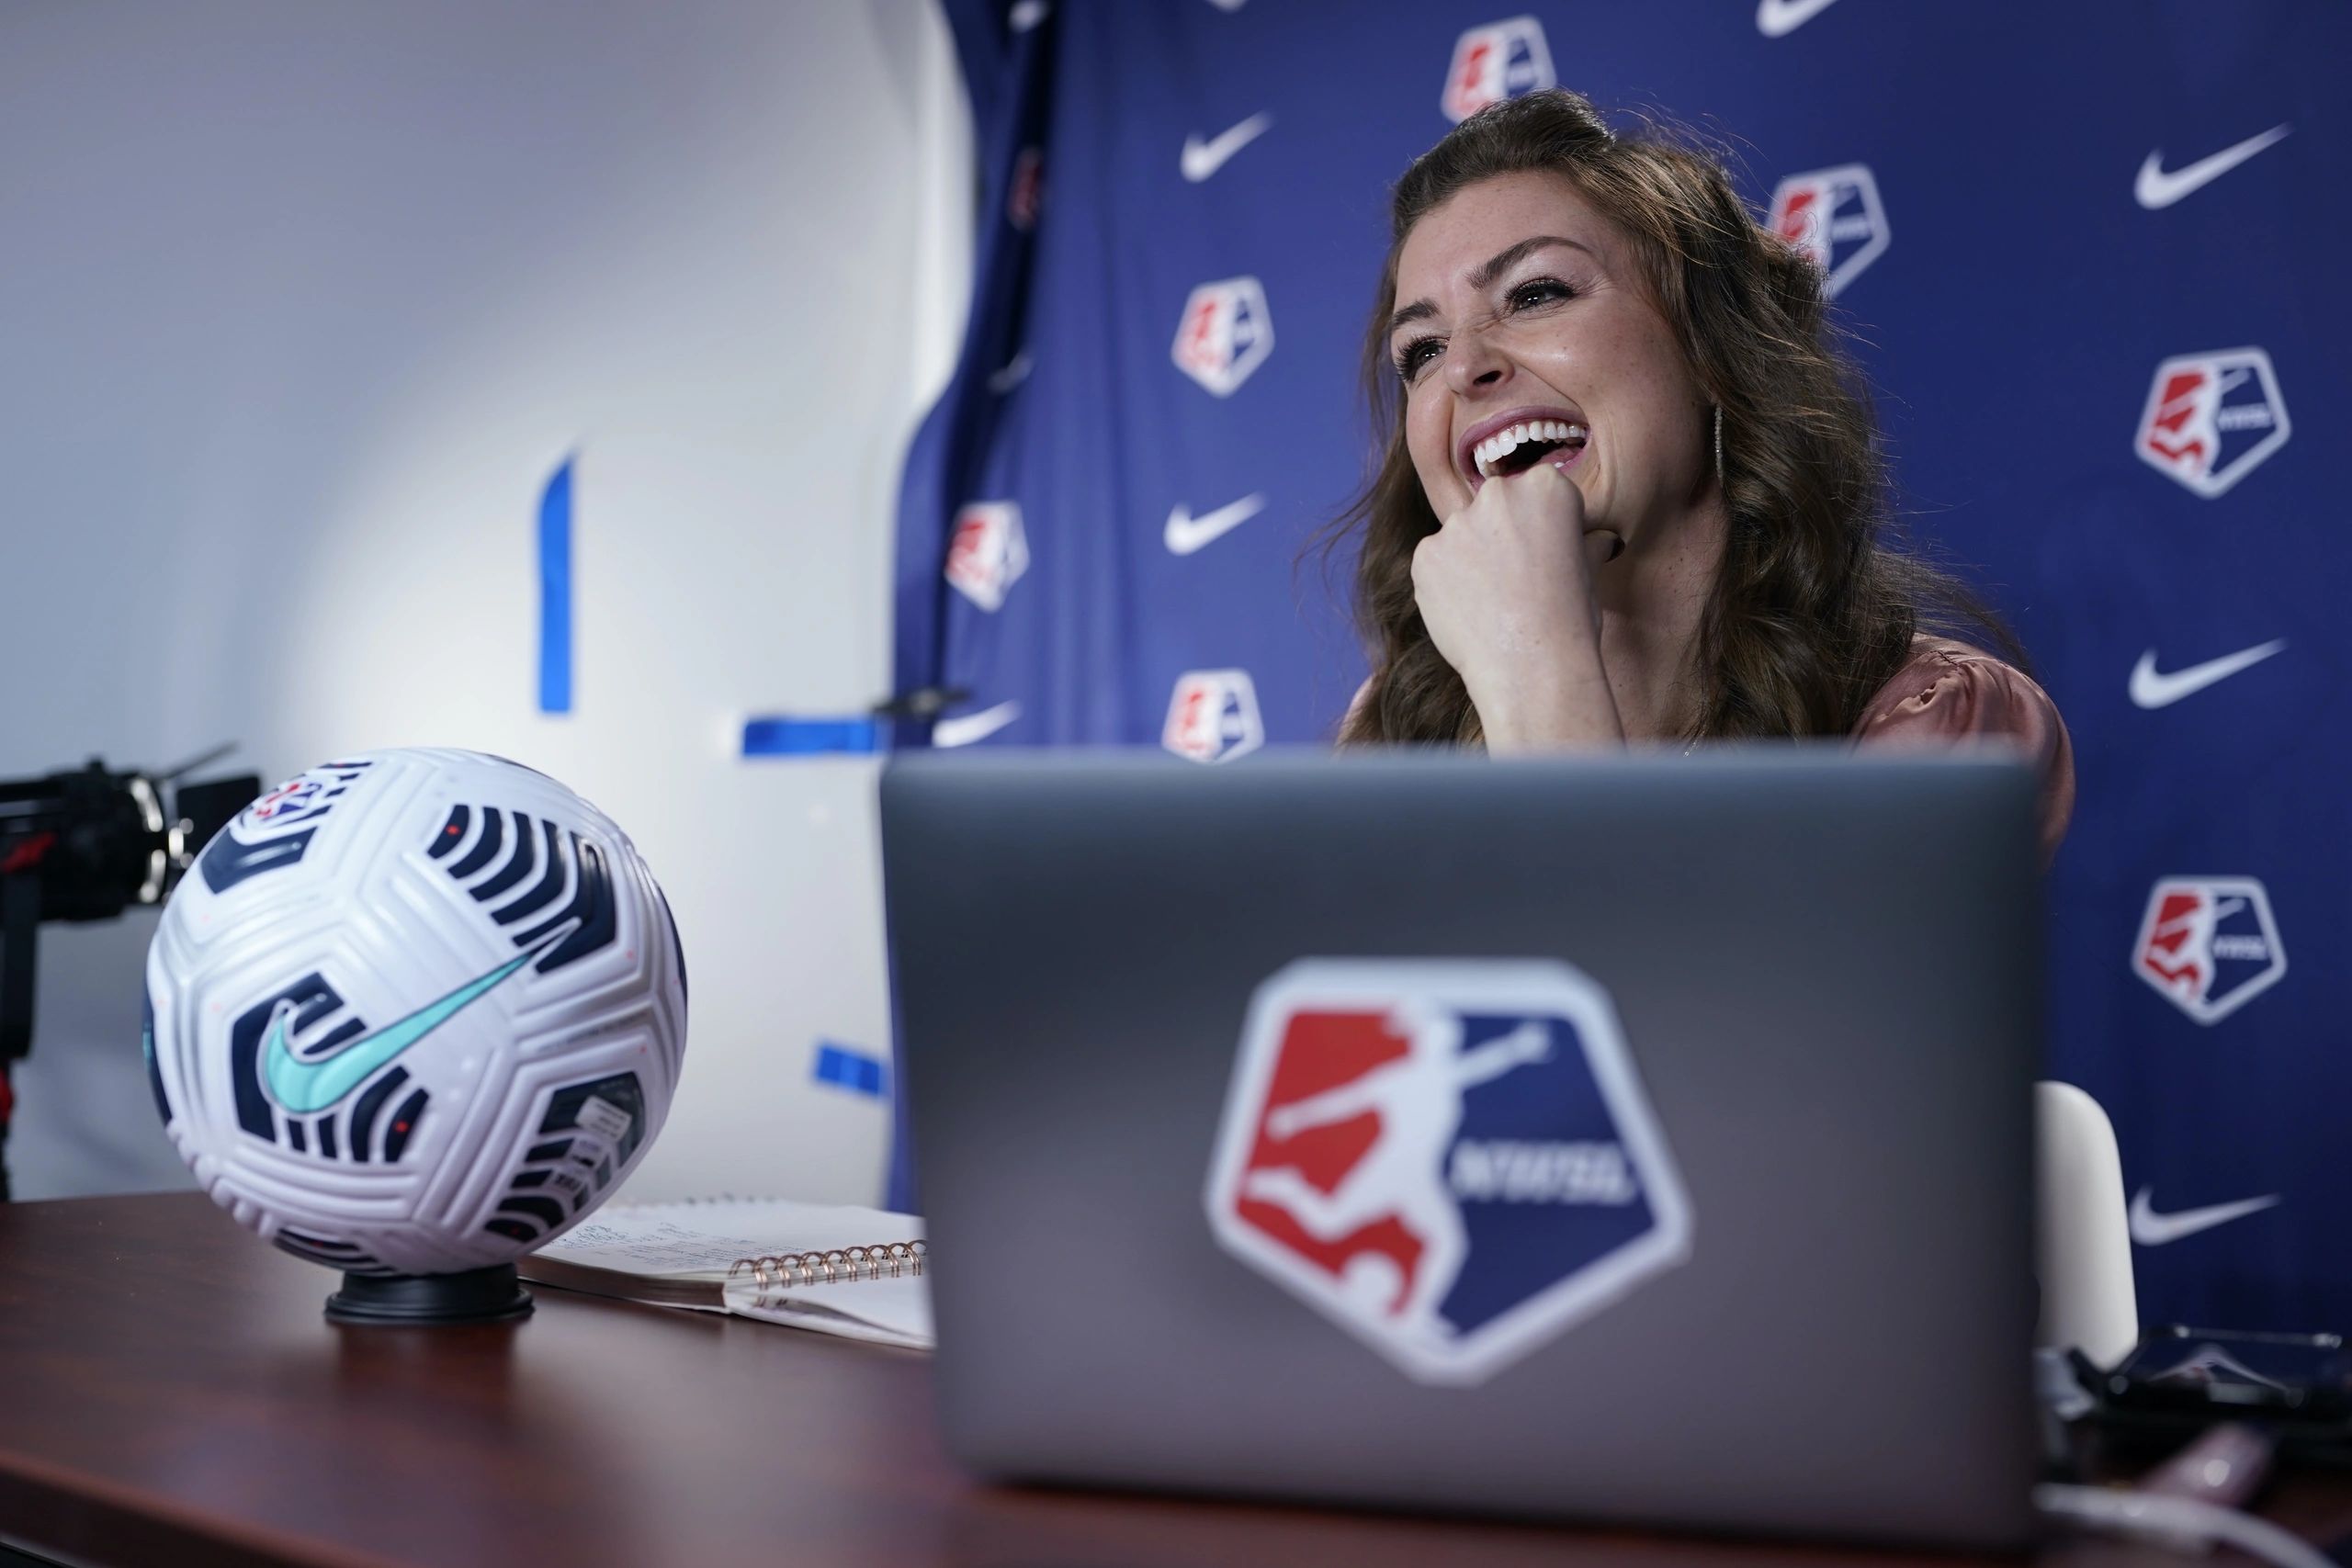 Looking at key moments from the NWSL Draft